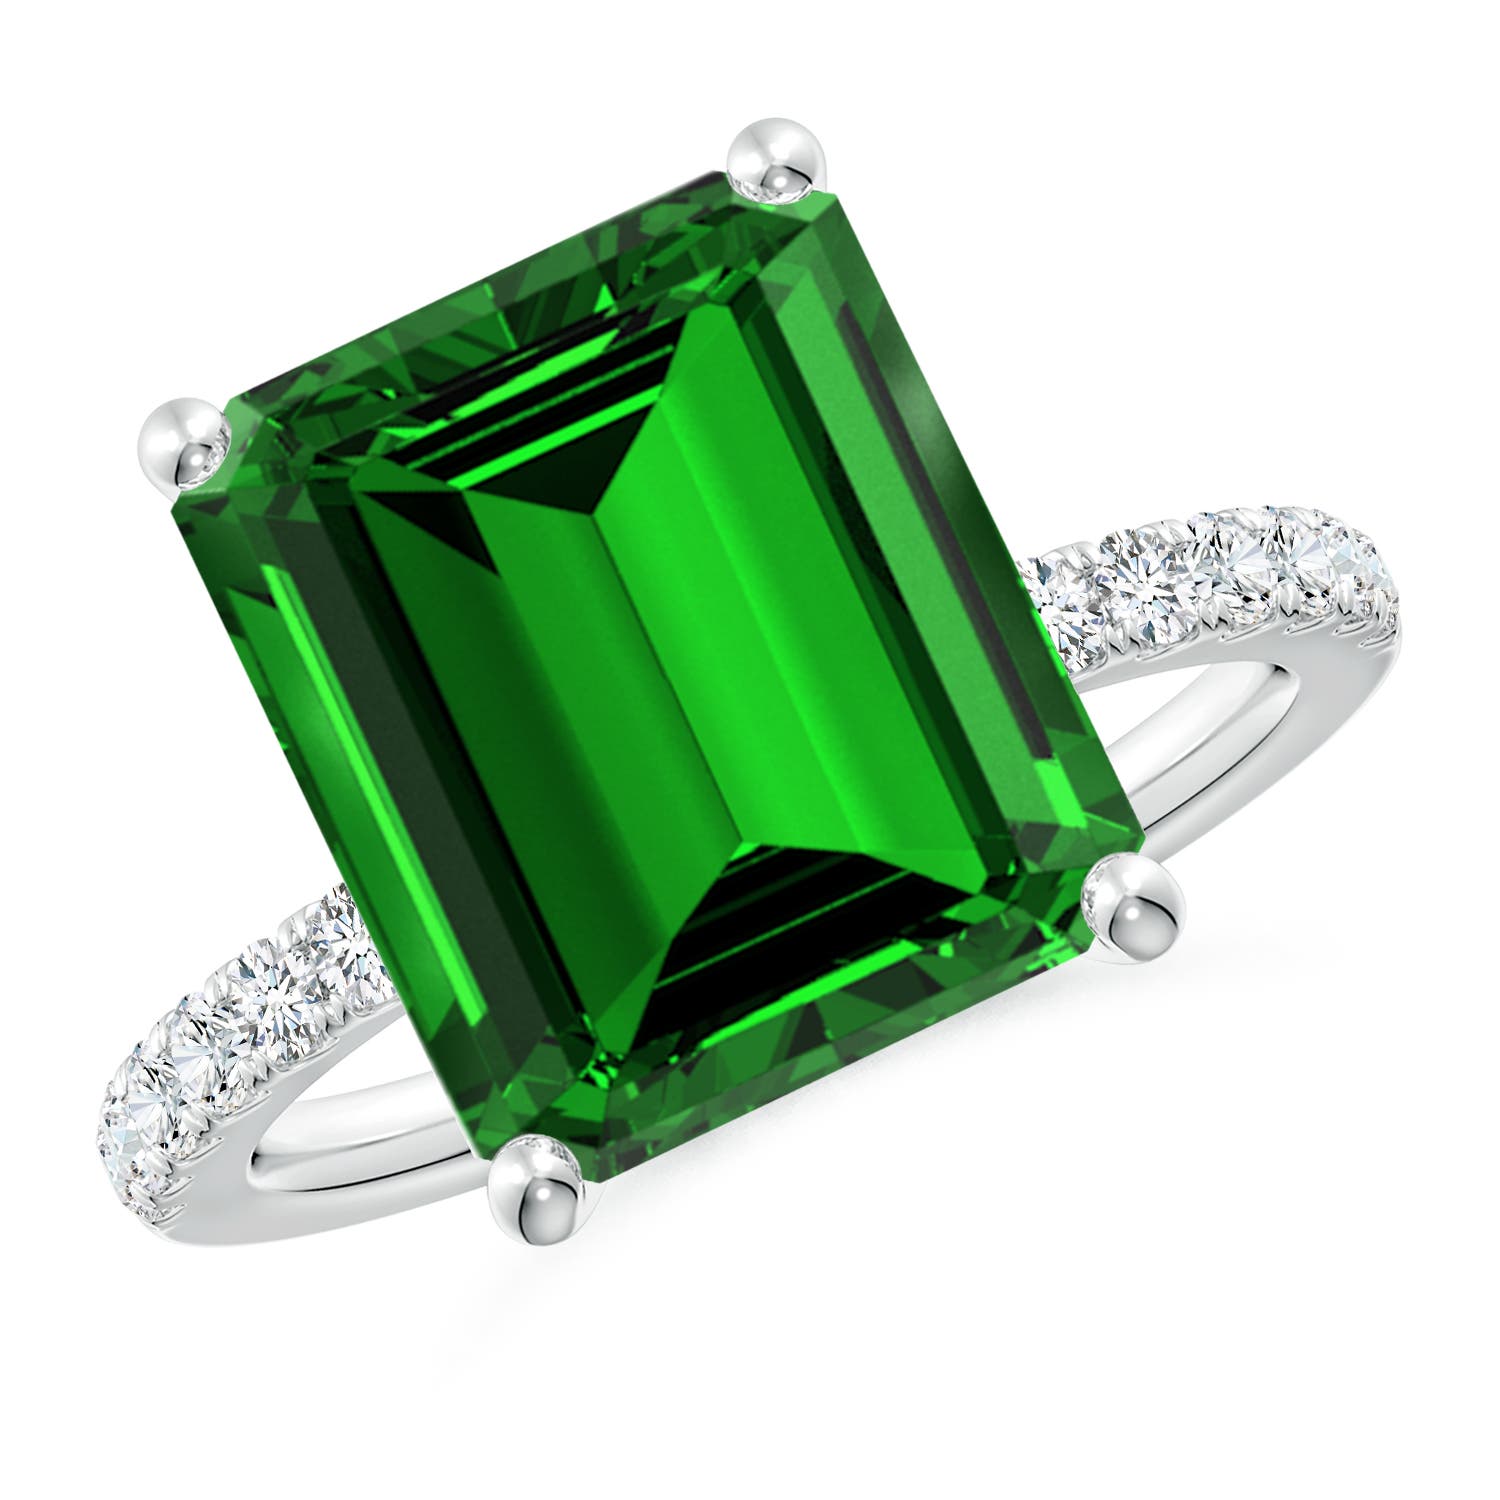 Lab-Grown Emerald-Cut Emerald Engagement Ring with Diamonds